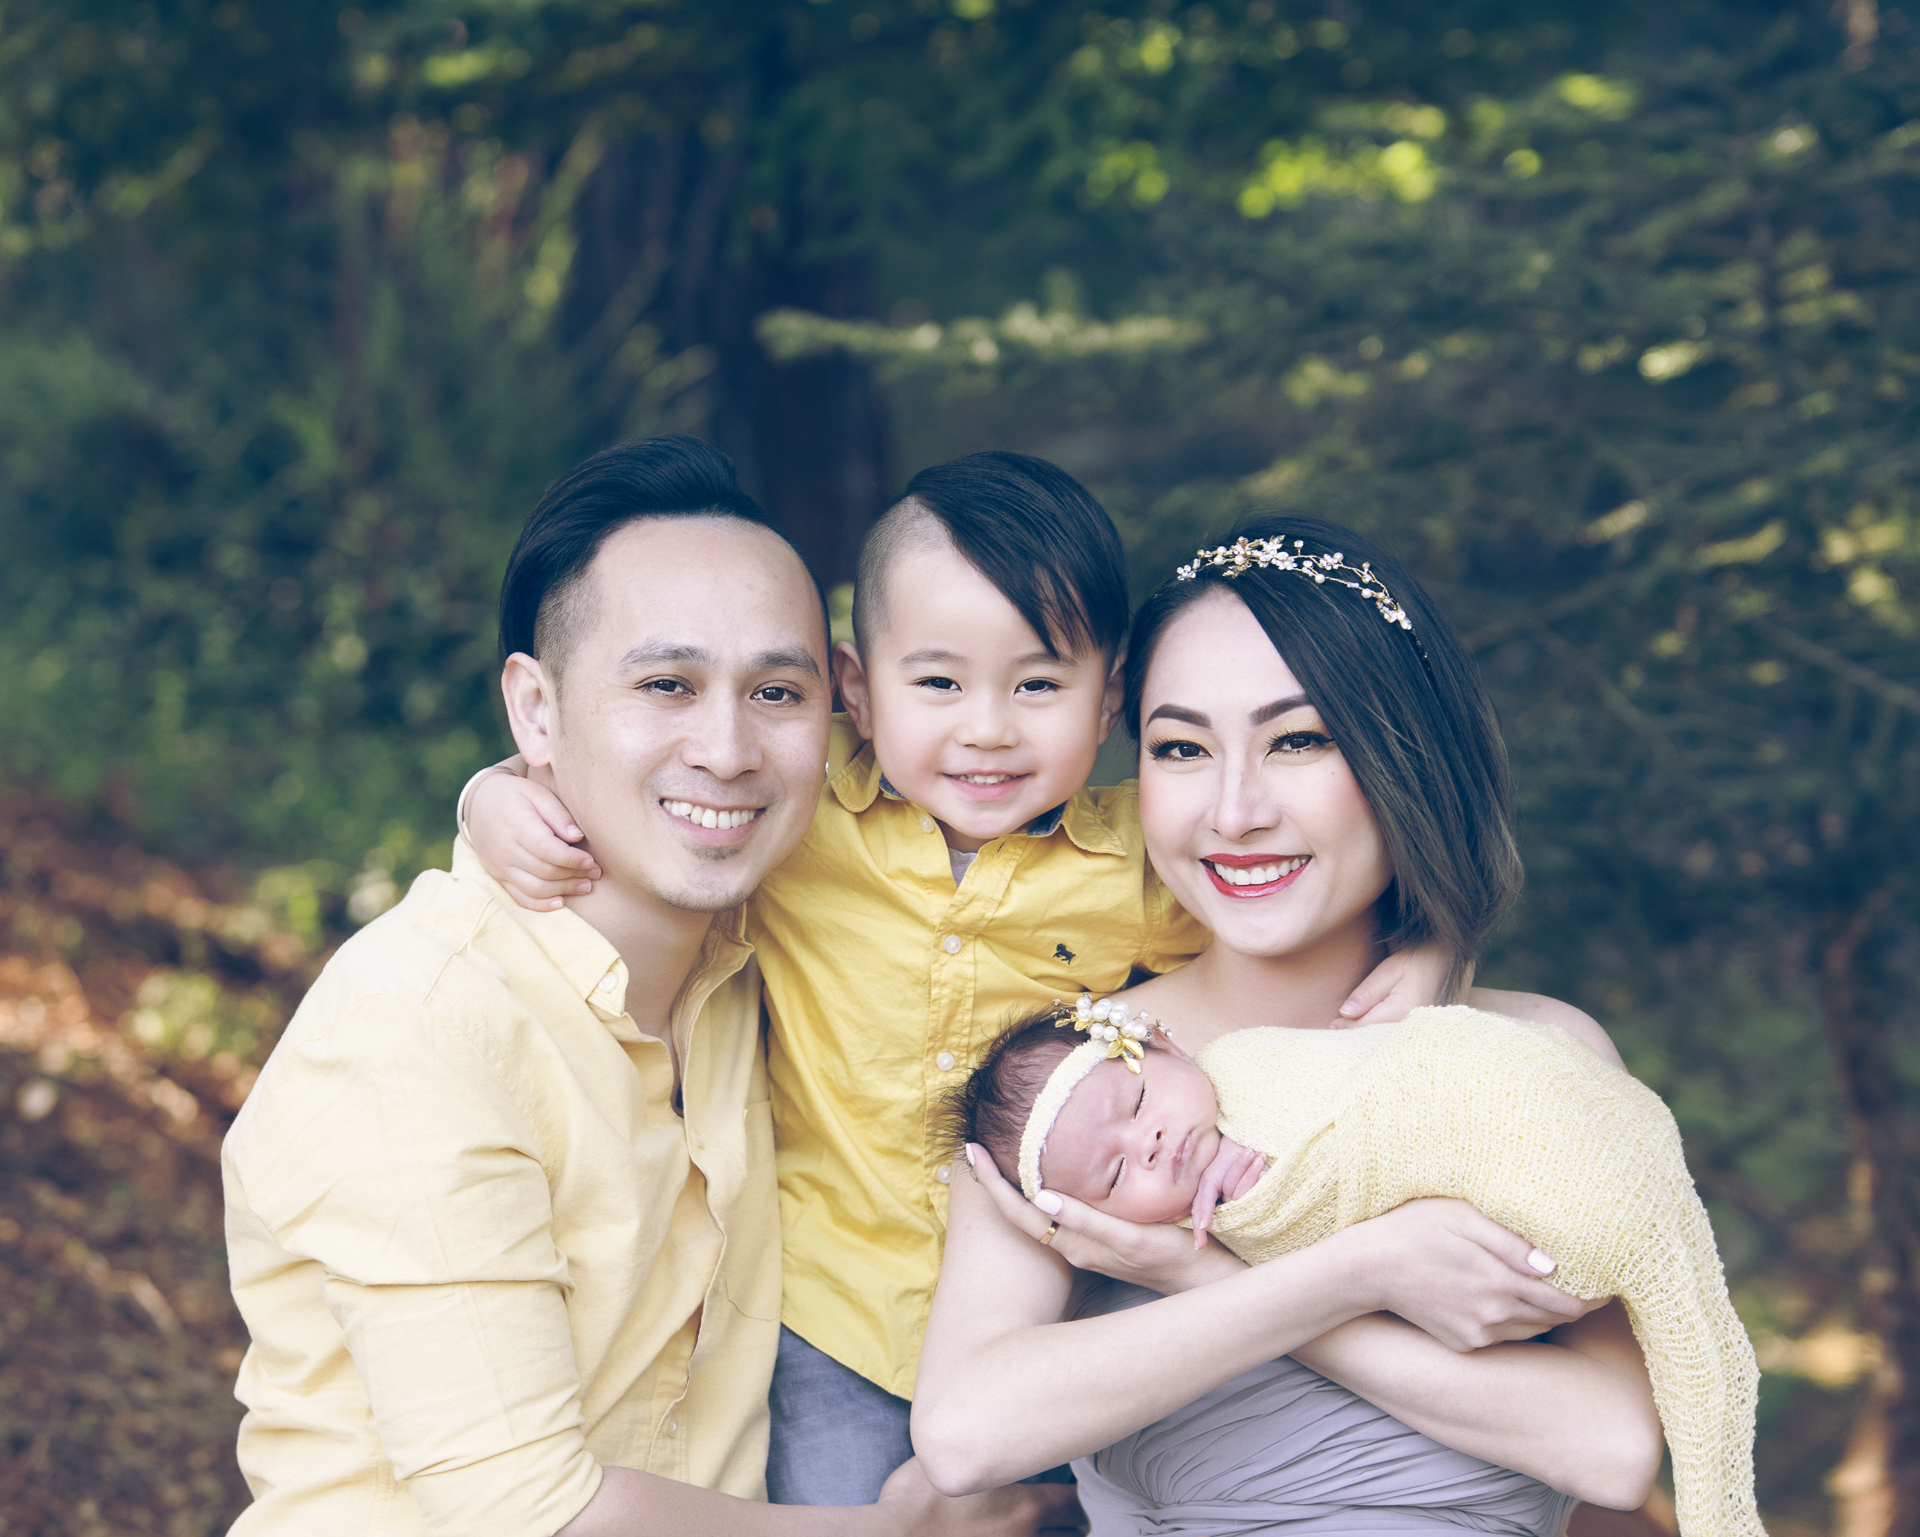 Family of 4 posing outdoors. Father on yellow T-shirt, toddler boy on T-shit, mother on gray dress holding newborn baby on yellow wrap outfit.